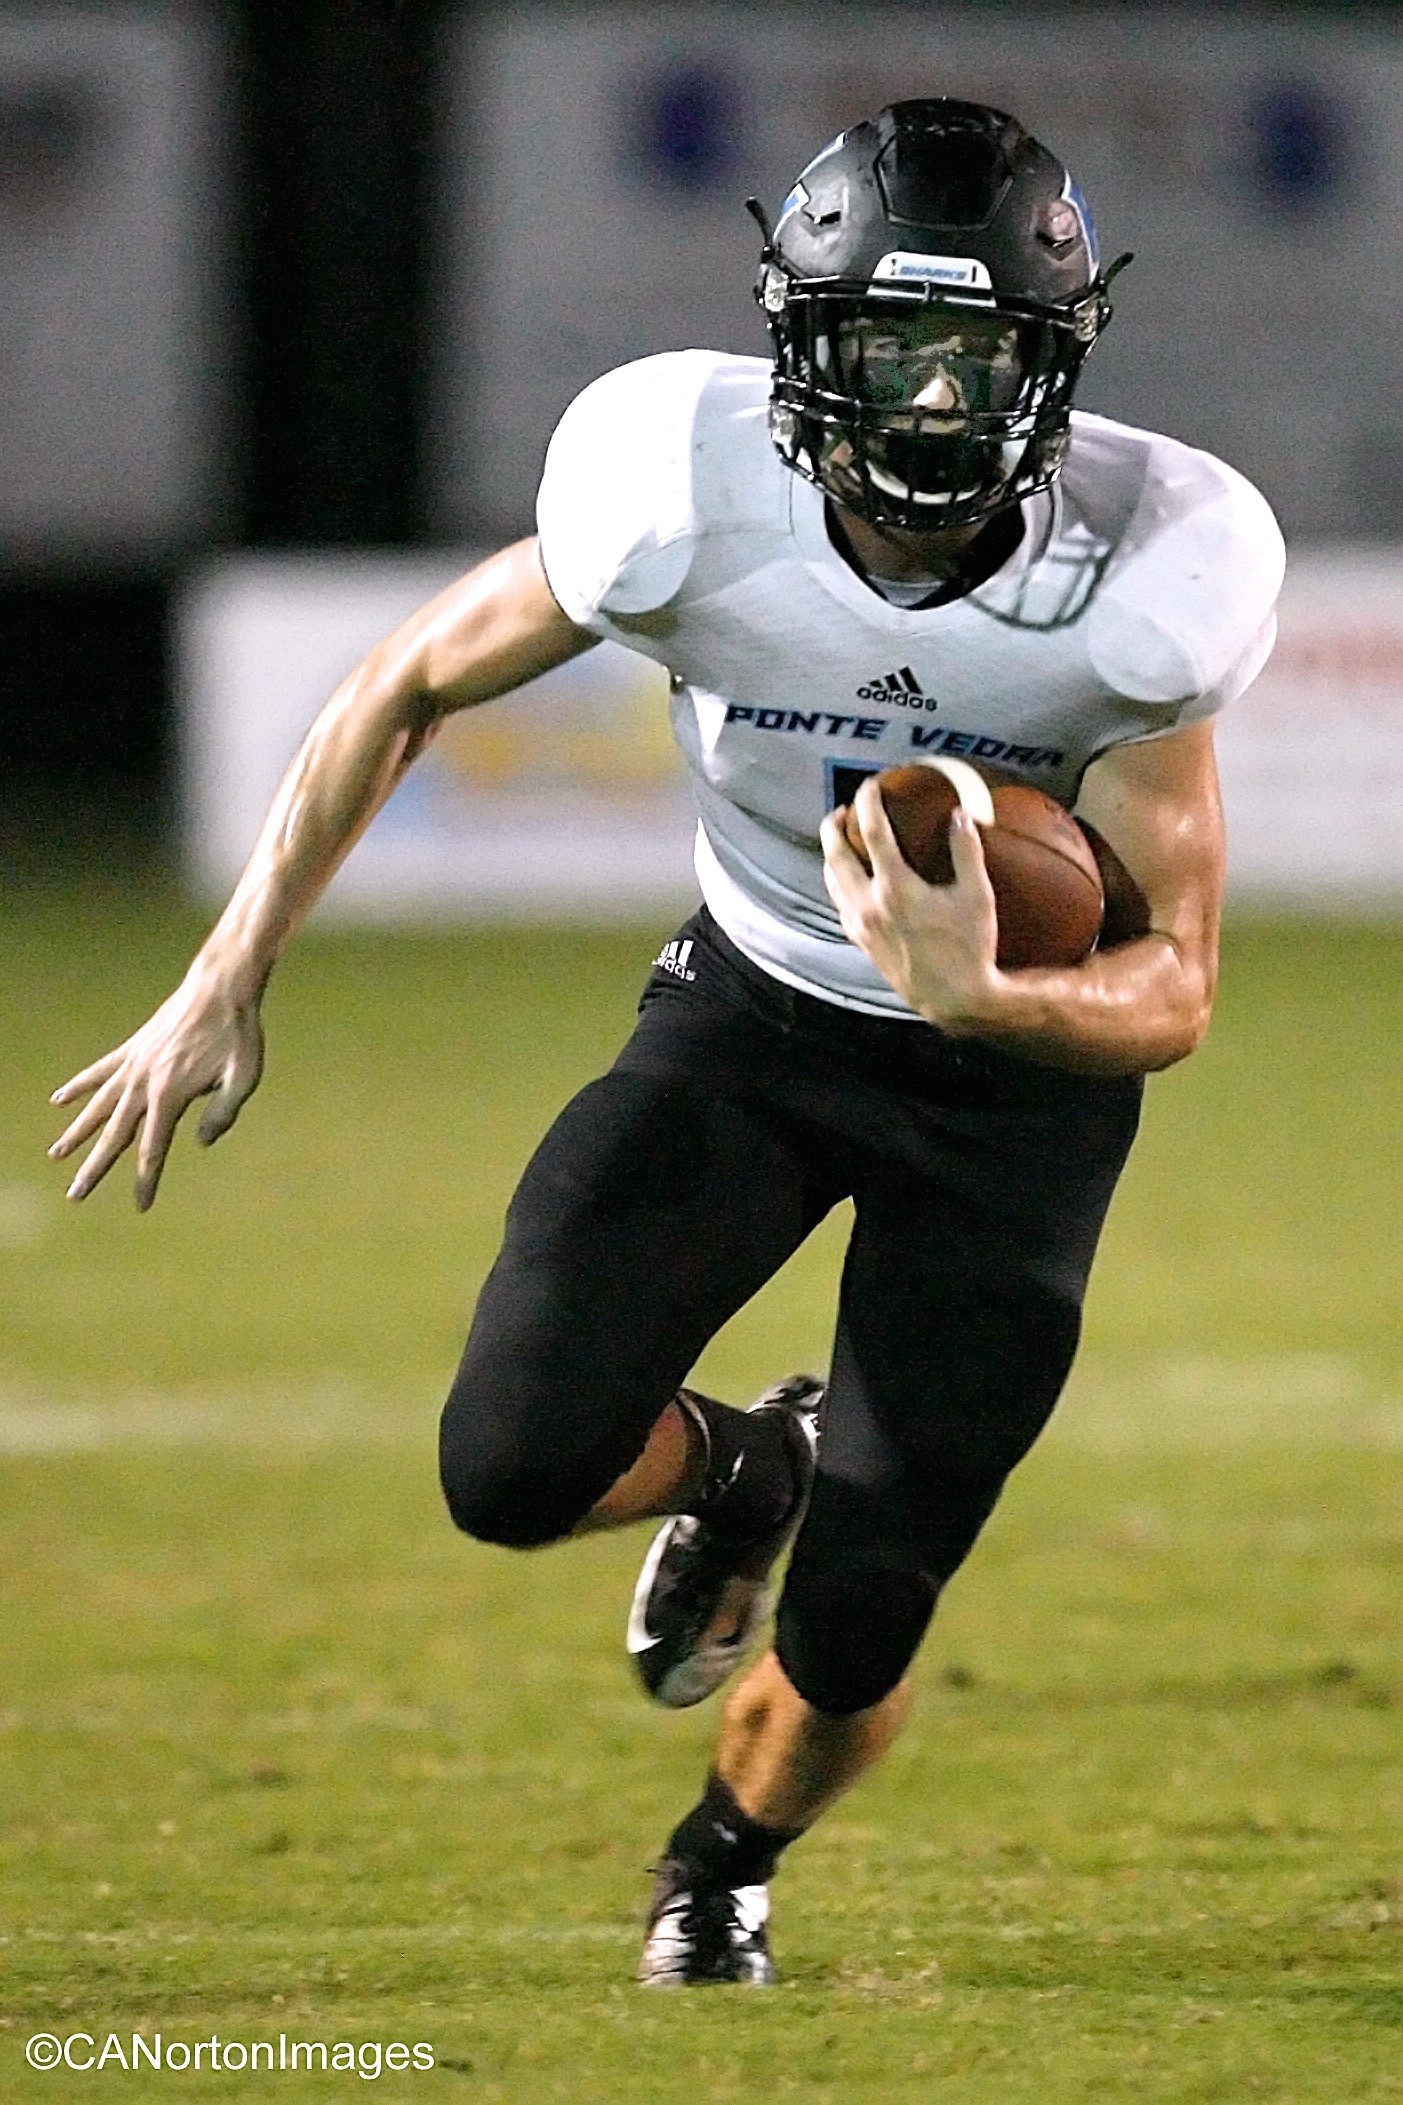 Quint Boyd #5 of the Sharks returns a kickoff for 60 yards to give the Sharks good field position